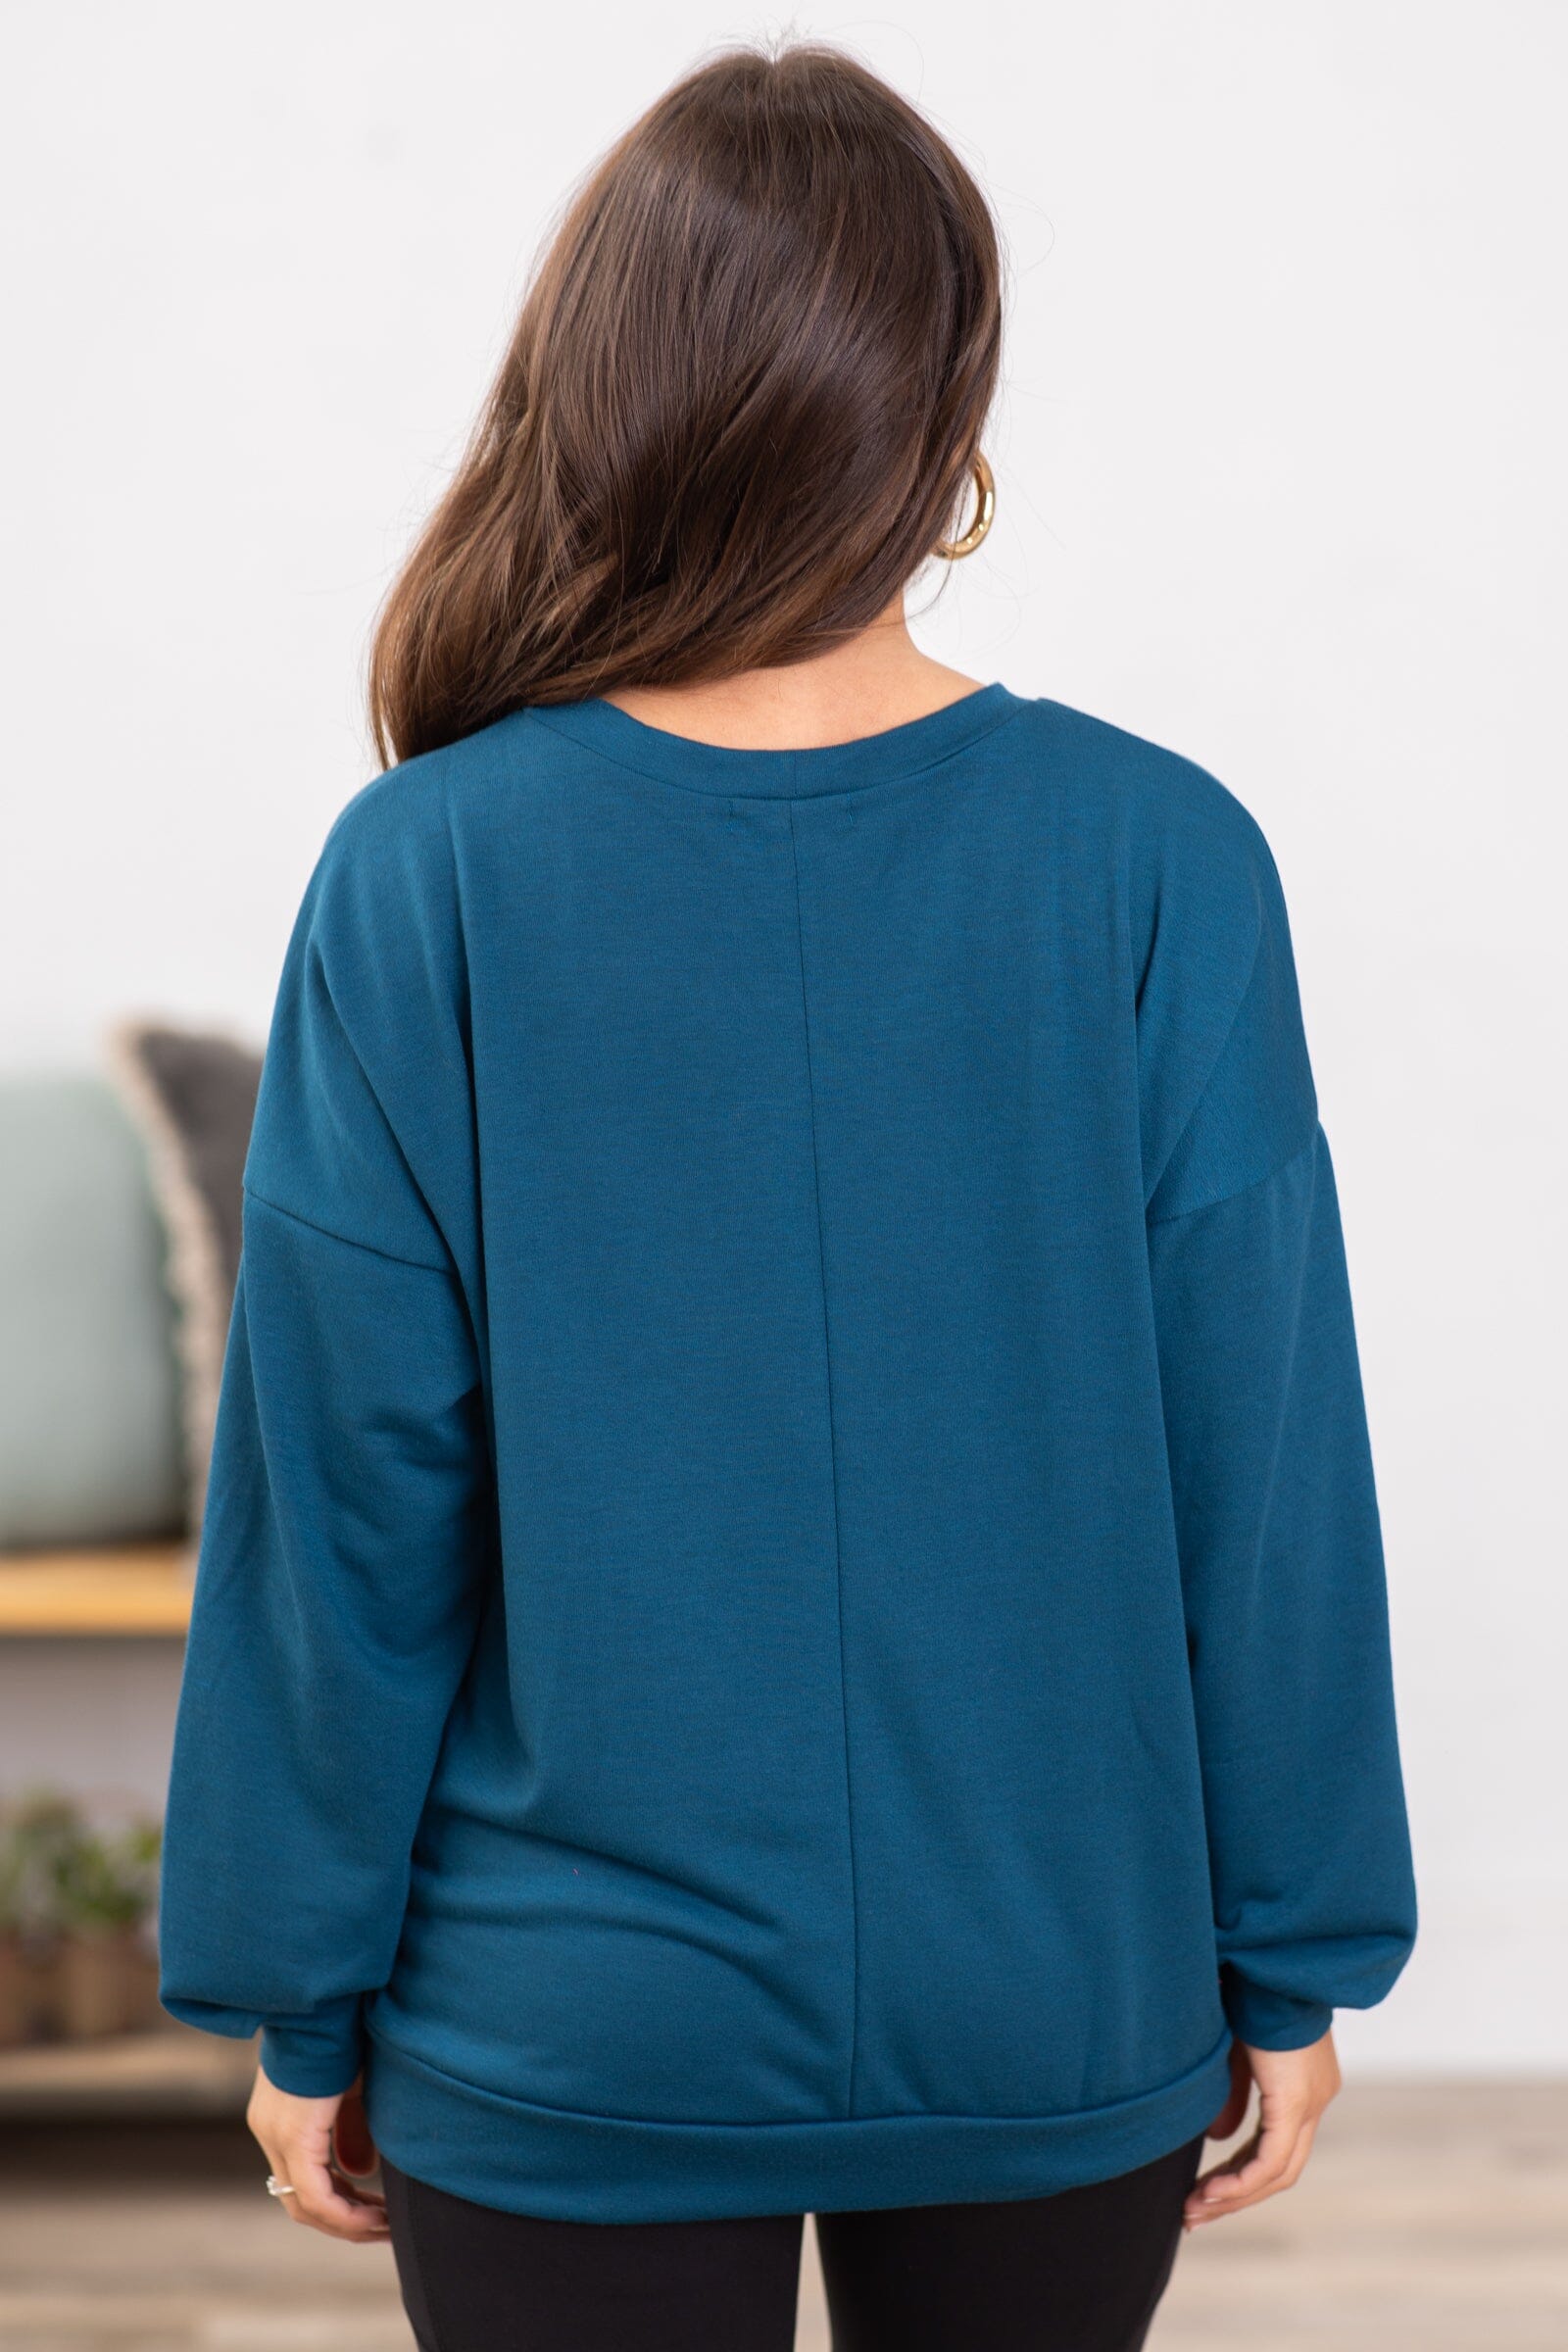 Teal Crew Neck Long Sleeve Top - Filly Flair